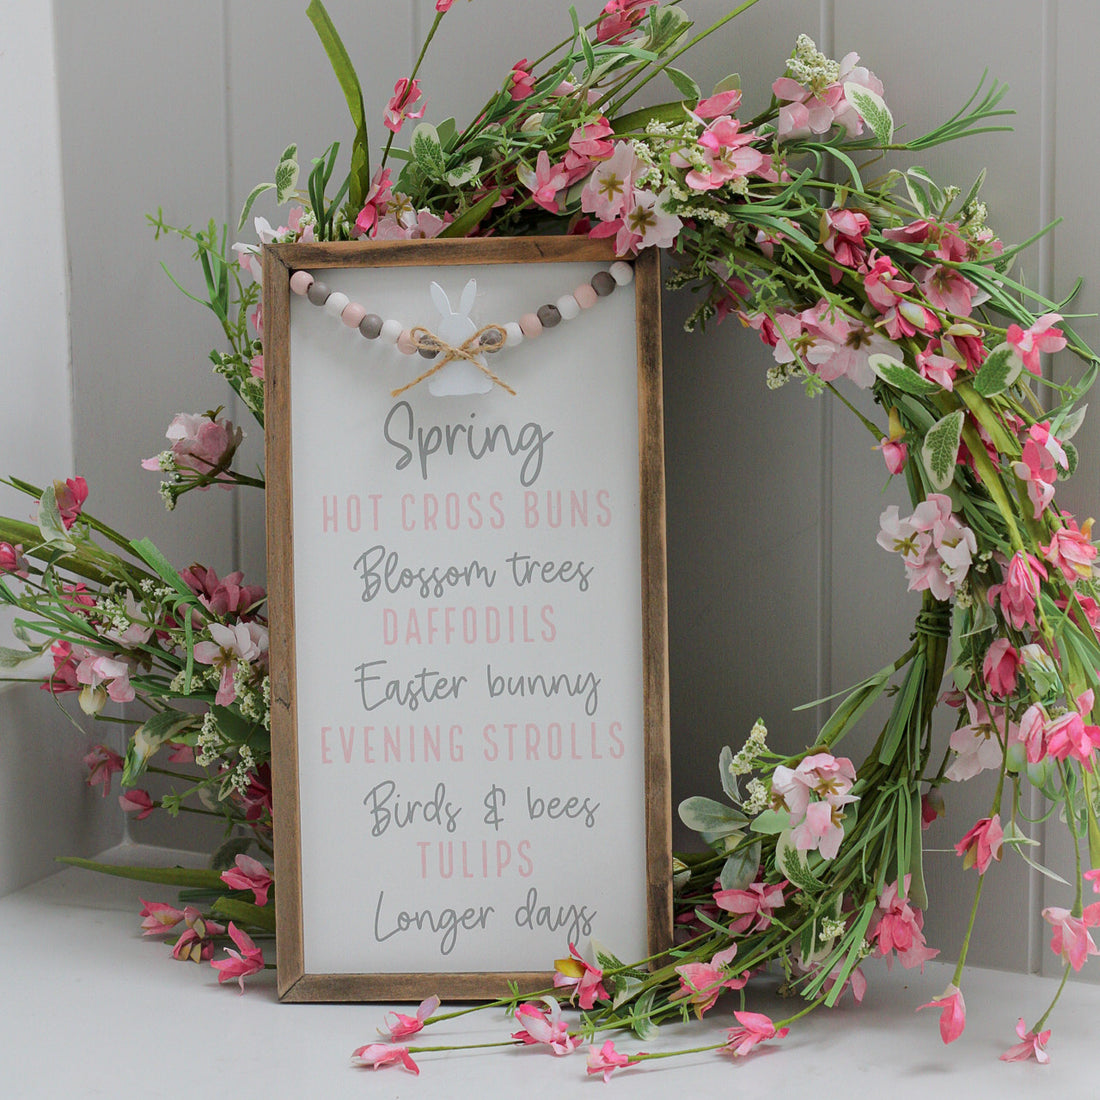 Rustic framed wooden plaque with white background with beaded hanging bunny detail and list of favourite things about Spring &